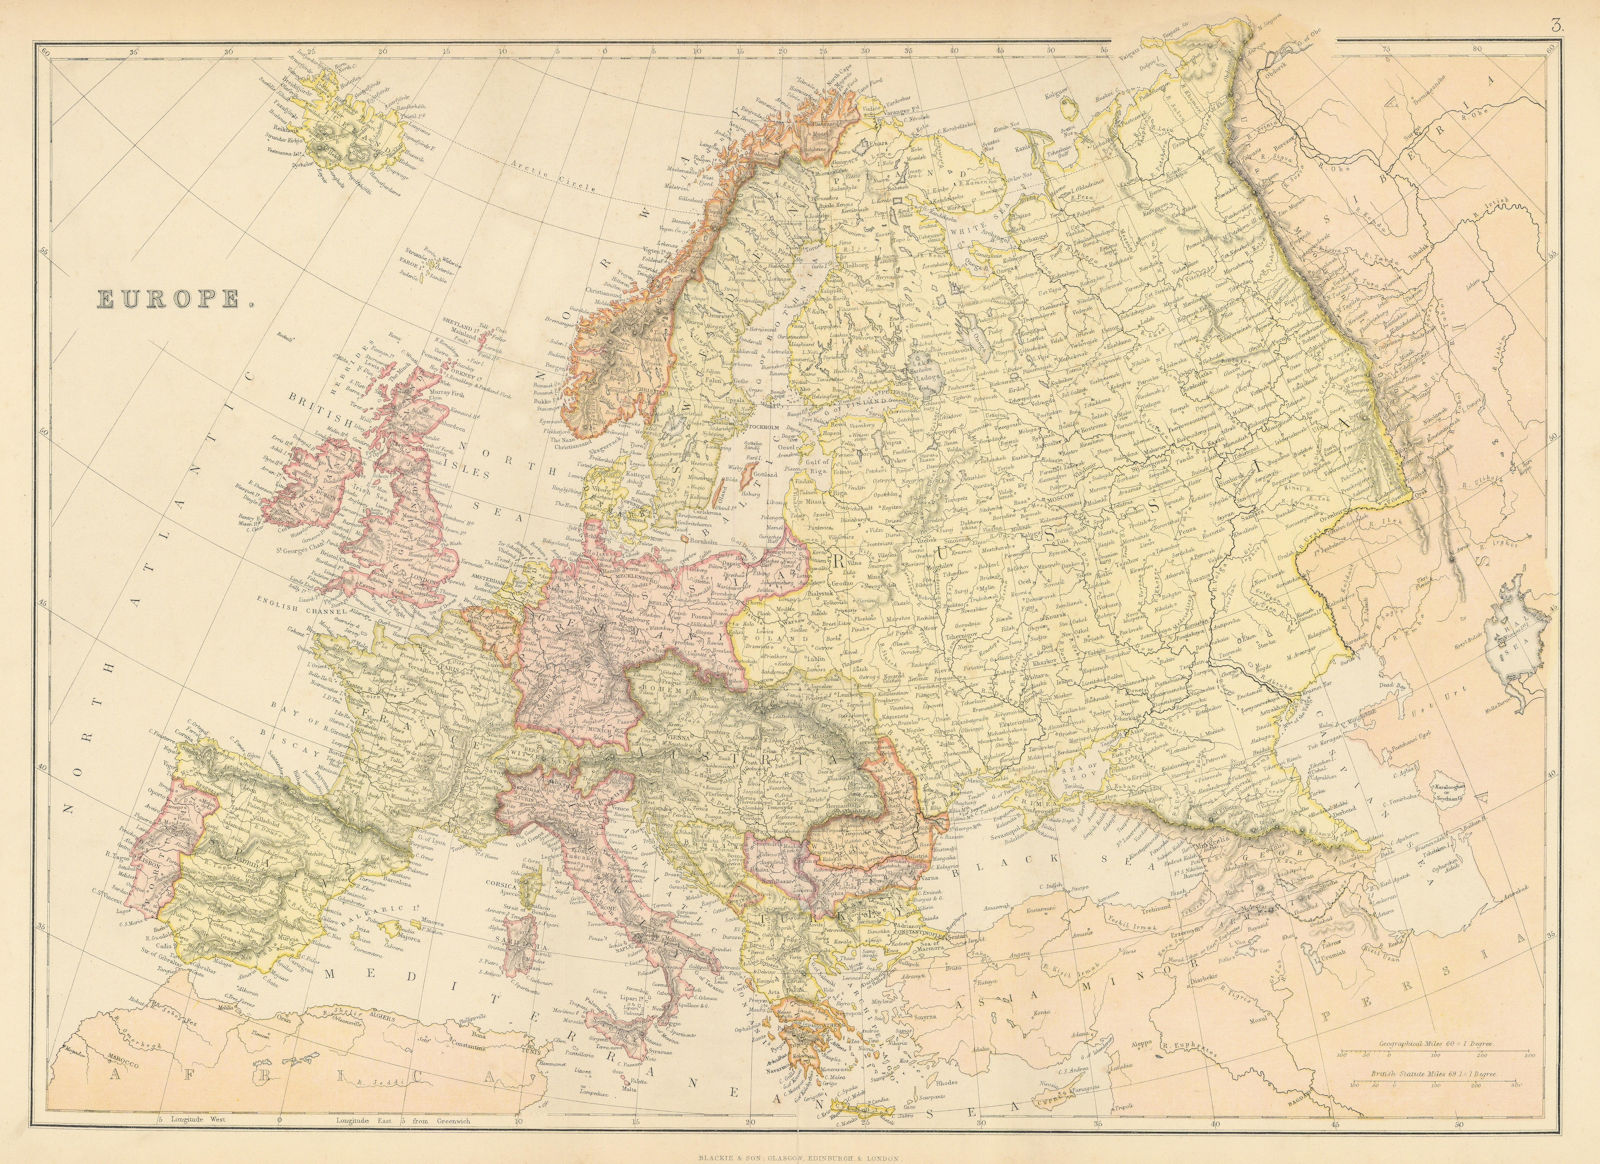 EUROPE POLITICAL. Russia excludes Georgia. BLACKIE 1886 old antique map chart